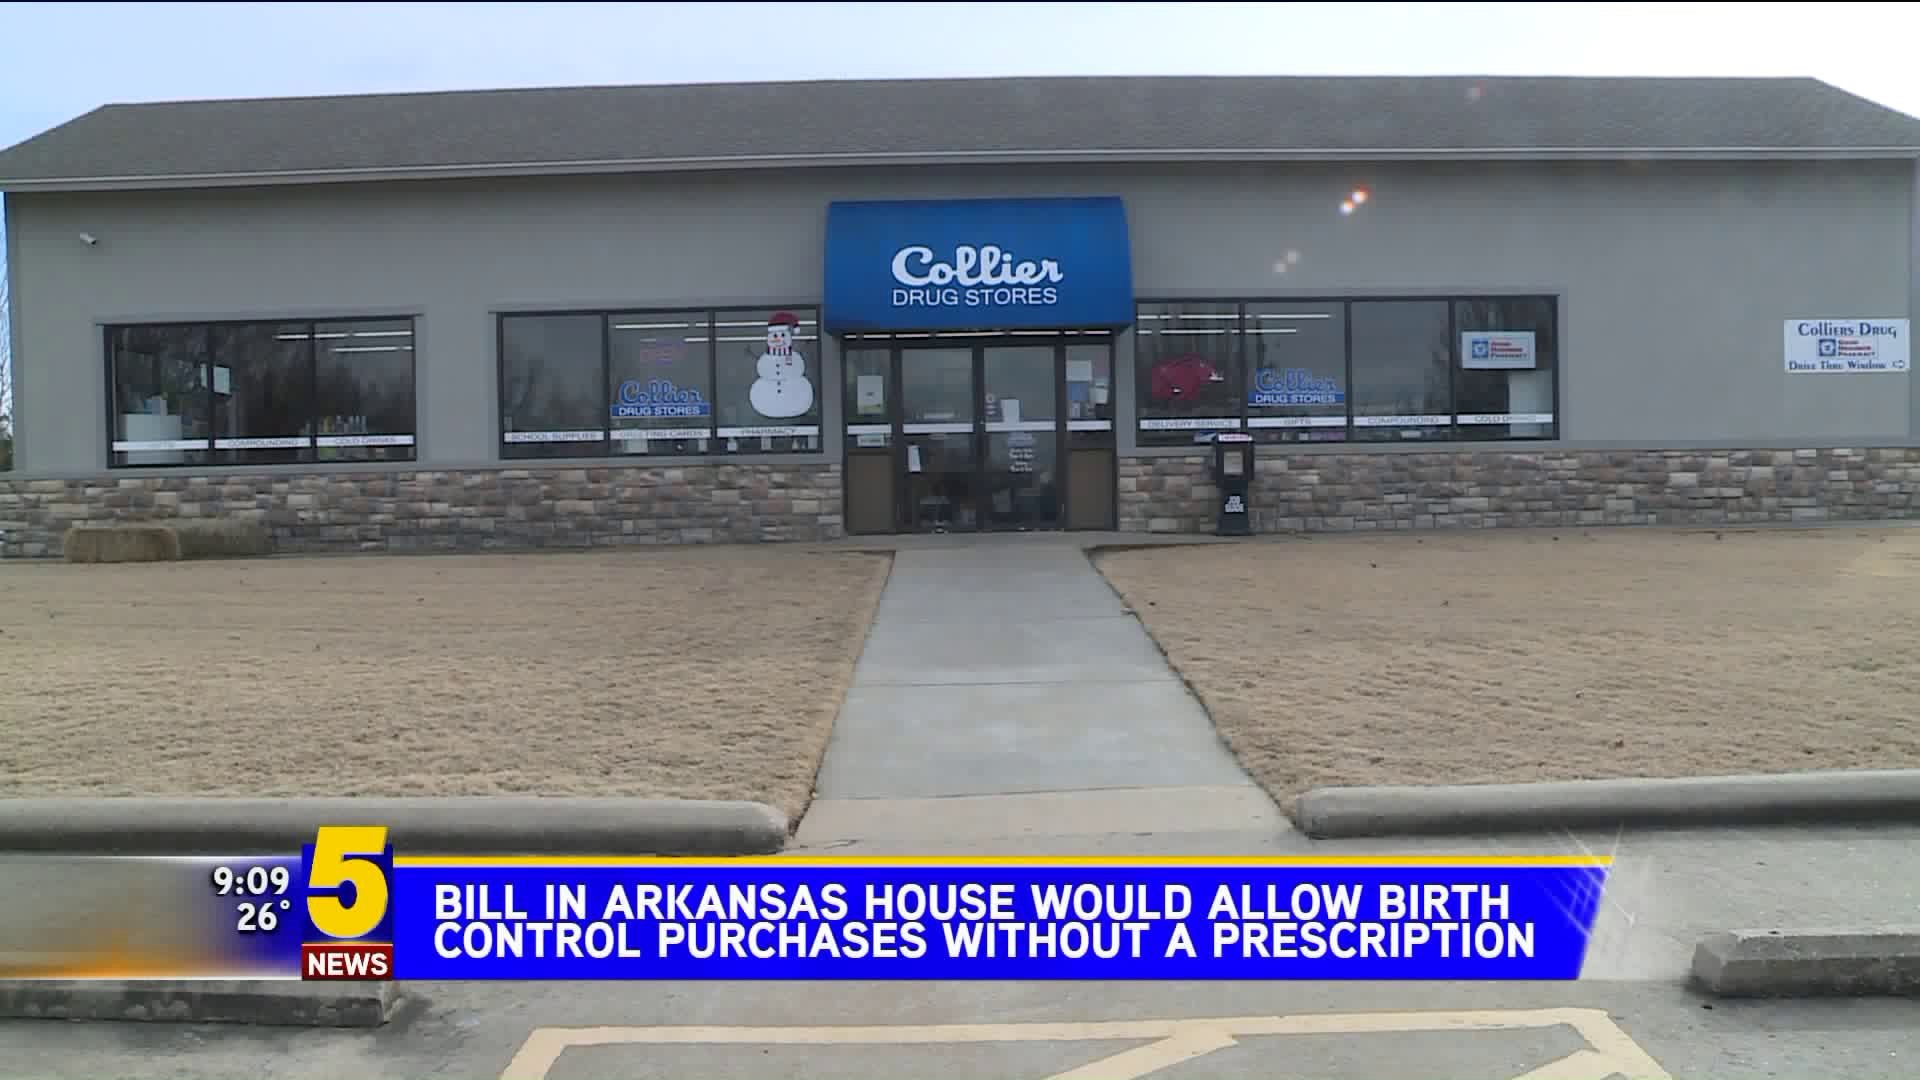 Bill In Arkansas House Would Allow Birth Control Purchases Without Prescription